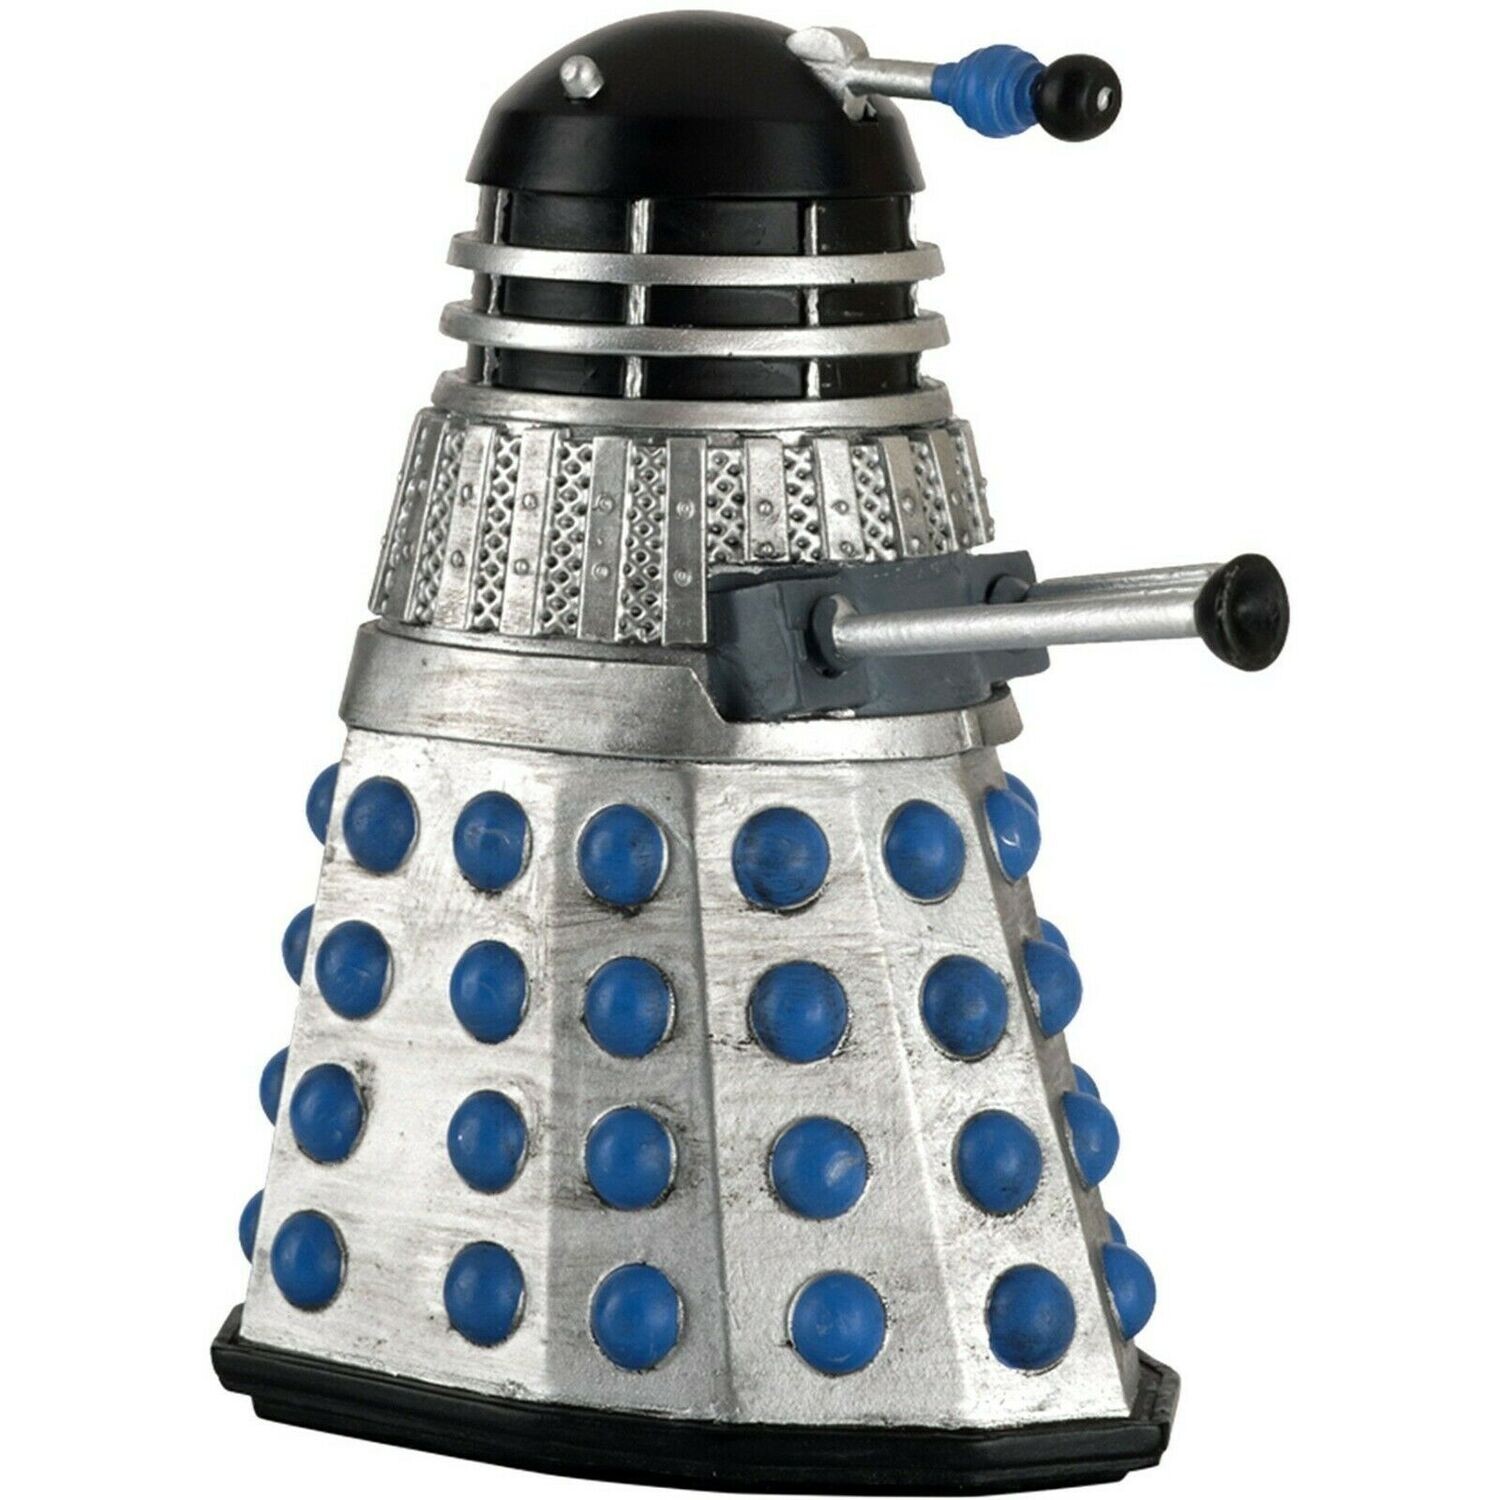 Black Dalek (The Evil of the Daleks) Figurine - 1:21 Scale - Includes 16 Page Magazine of the Classic Episode